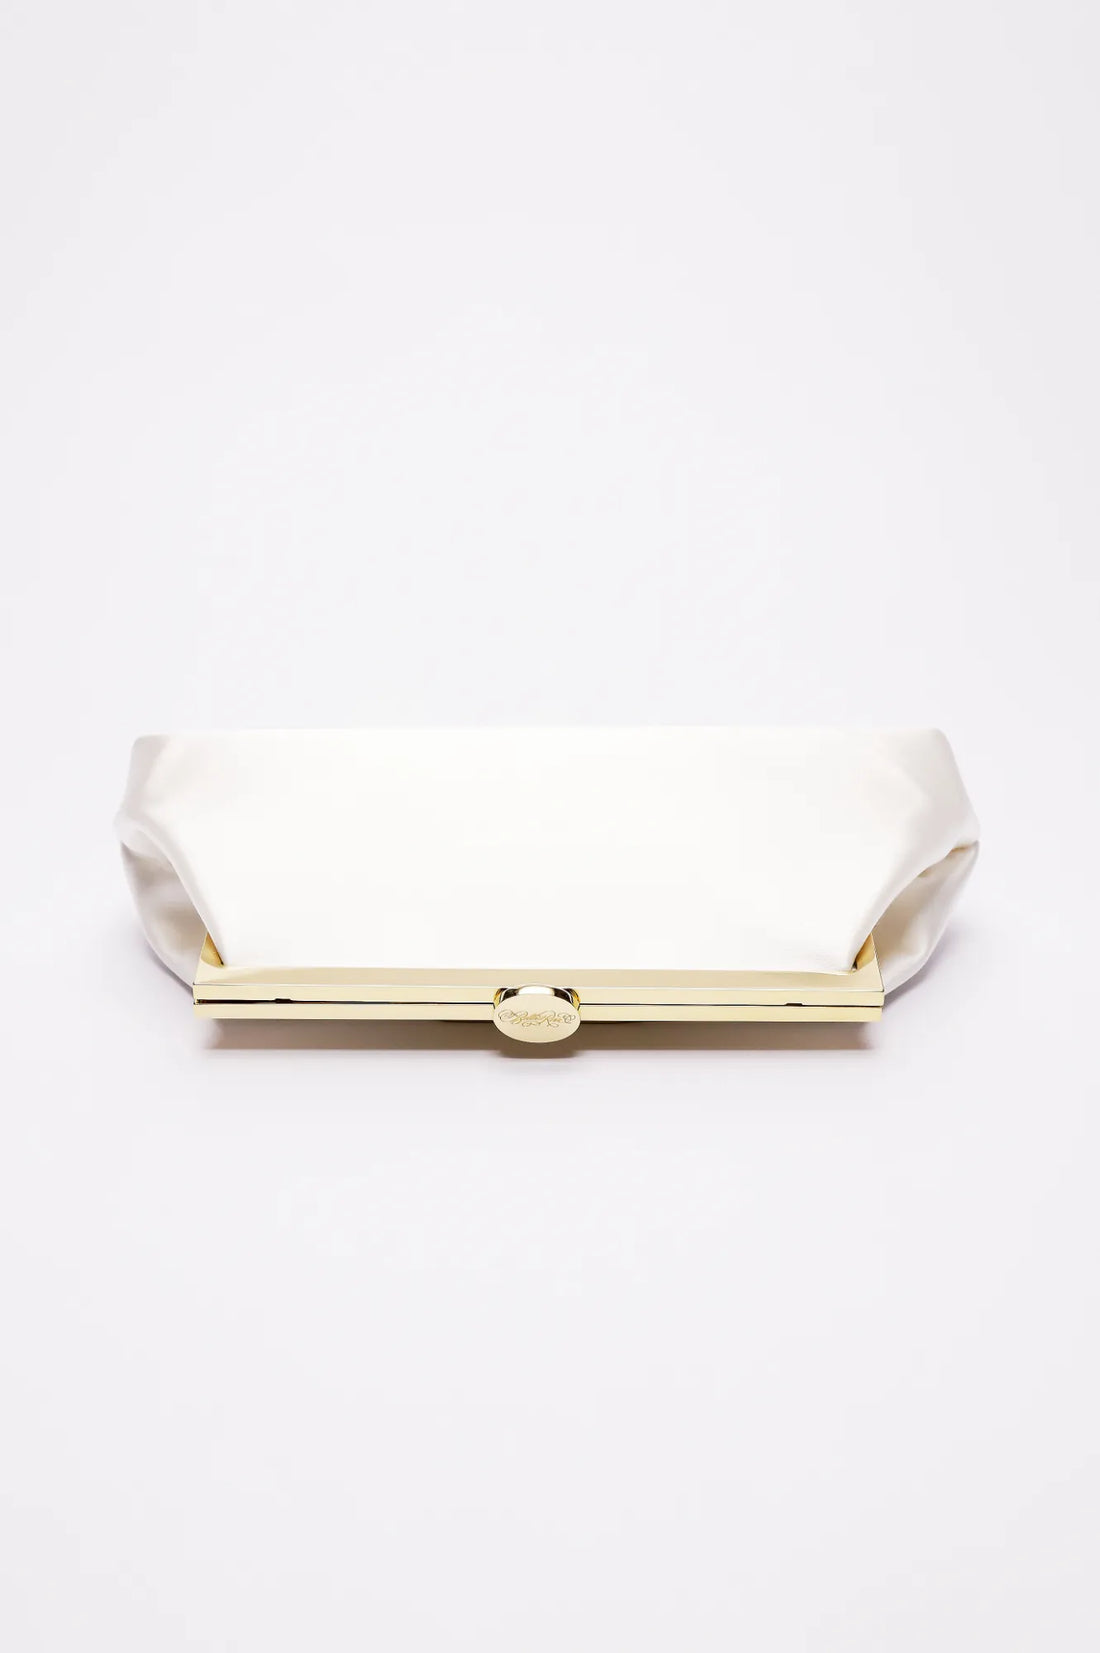 Top view of a white bridal clutch.